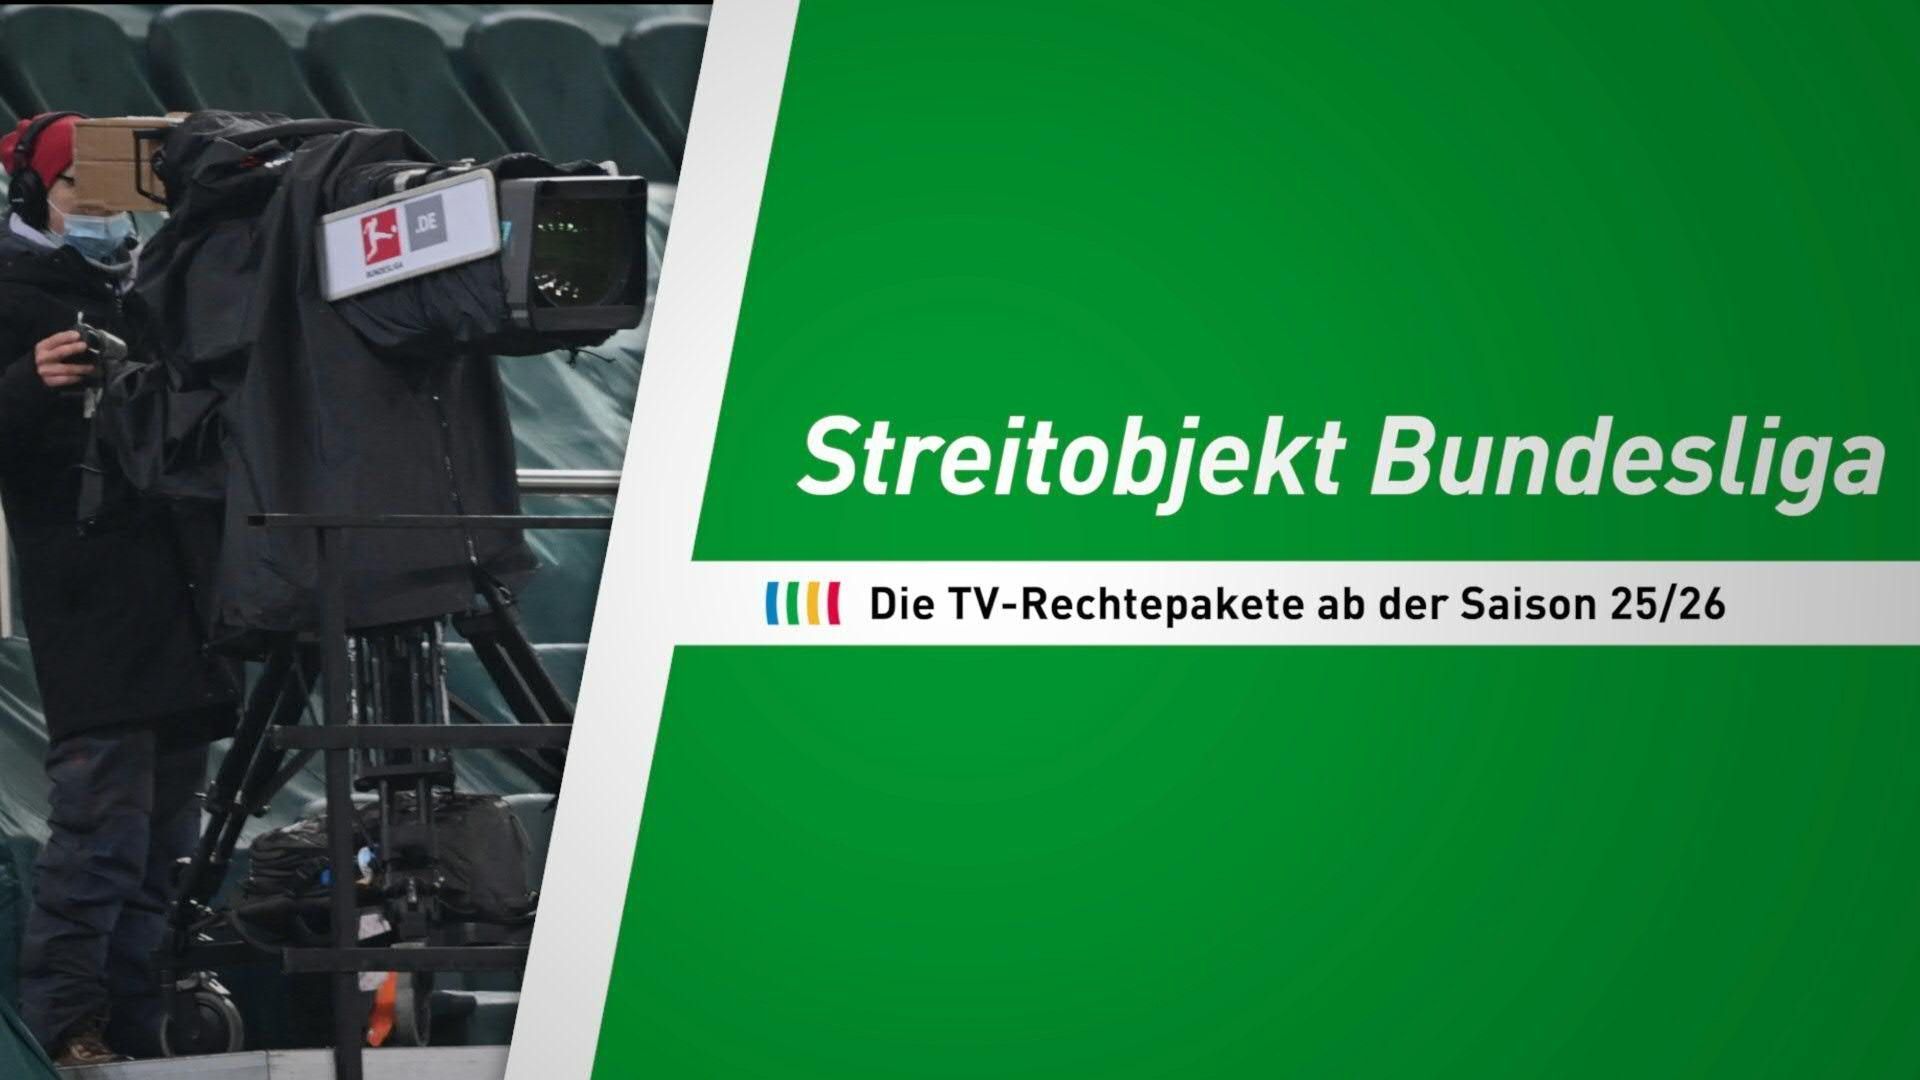 Bundesliga in dispute: the DFL's TV rights packages